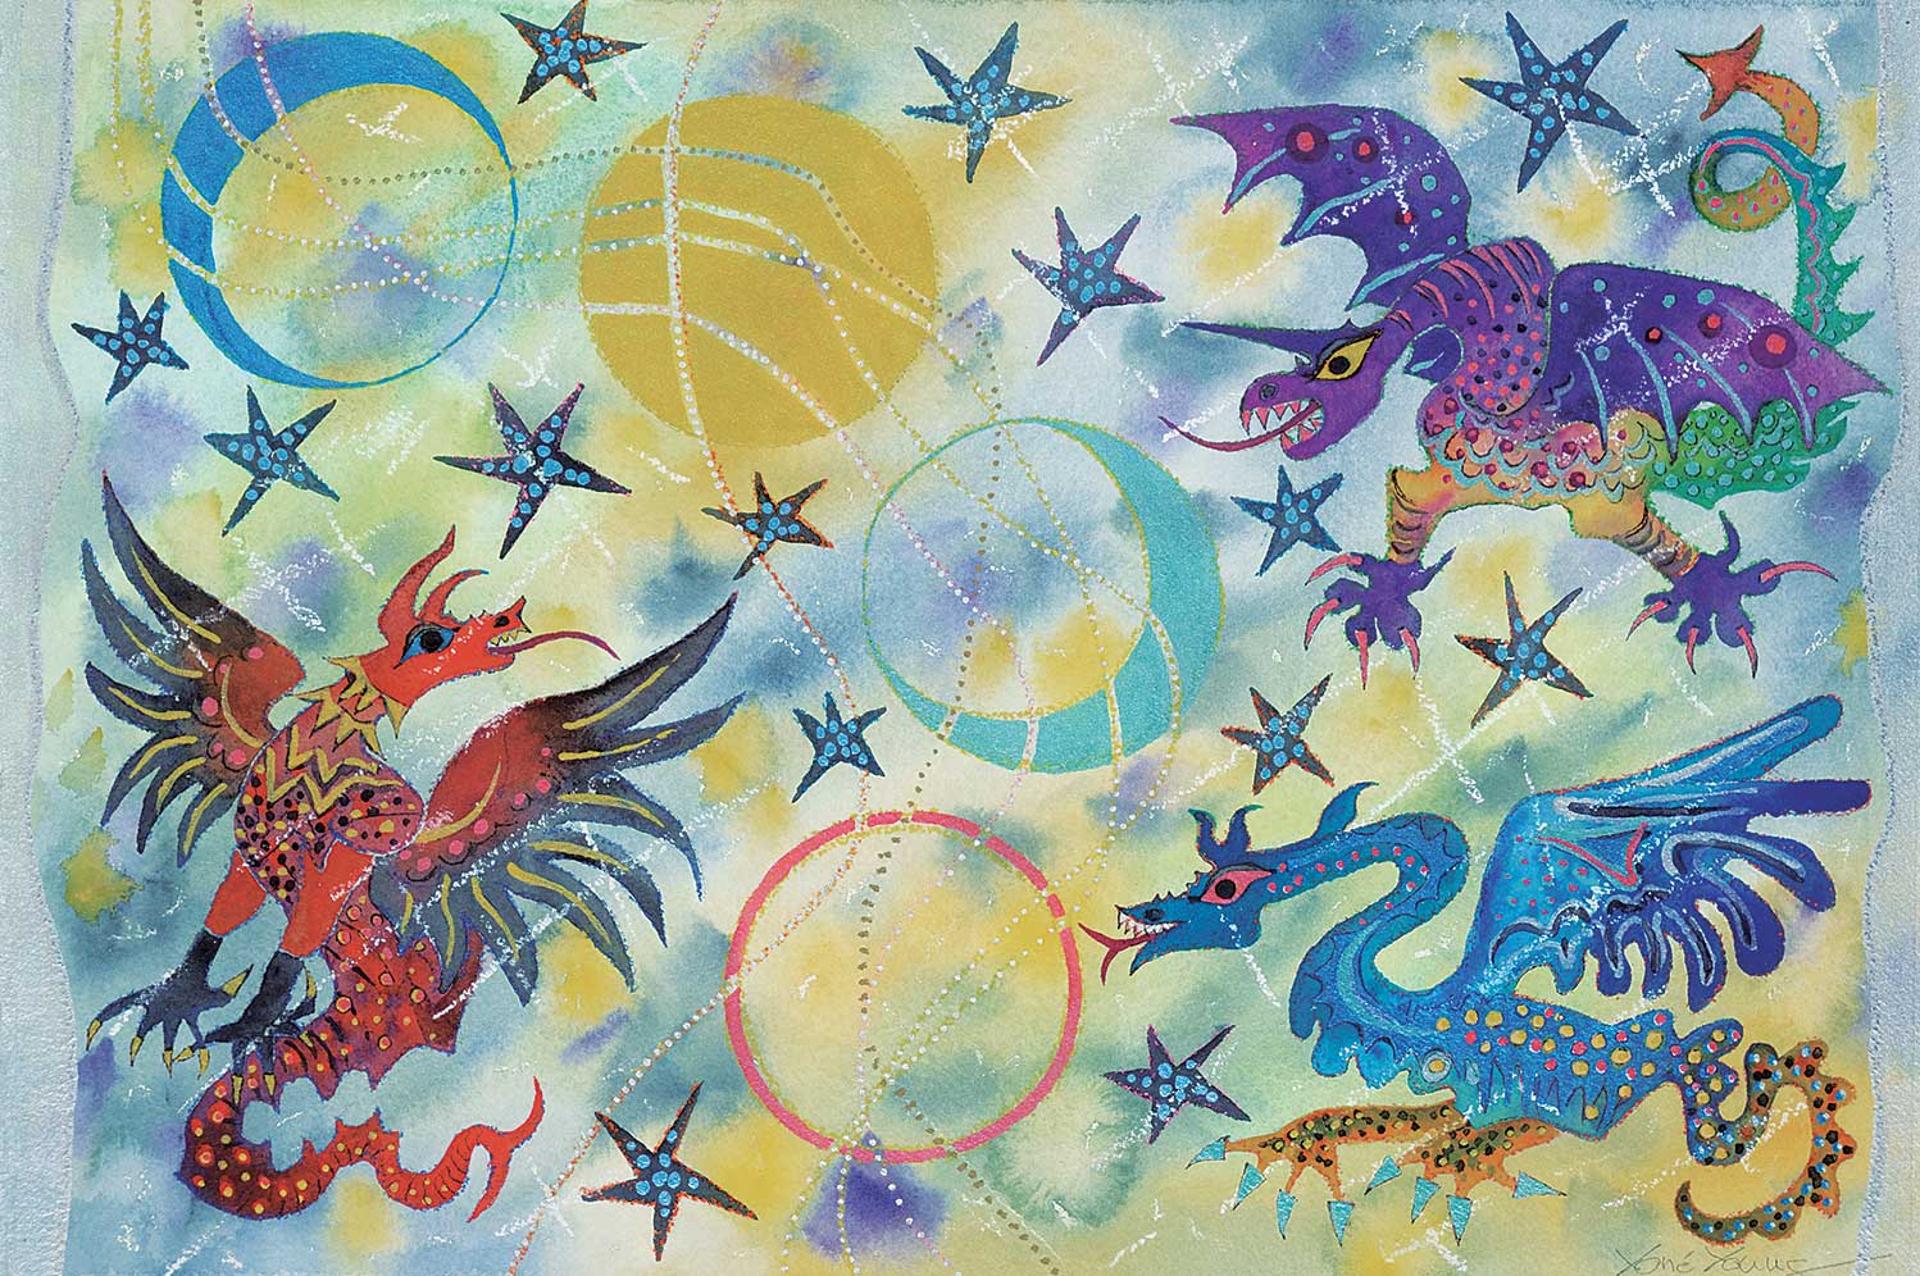 Yone Kvietys Young (1924-2011) - Untitled - Fantasical Creatures